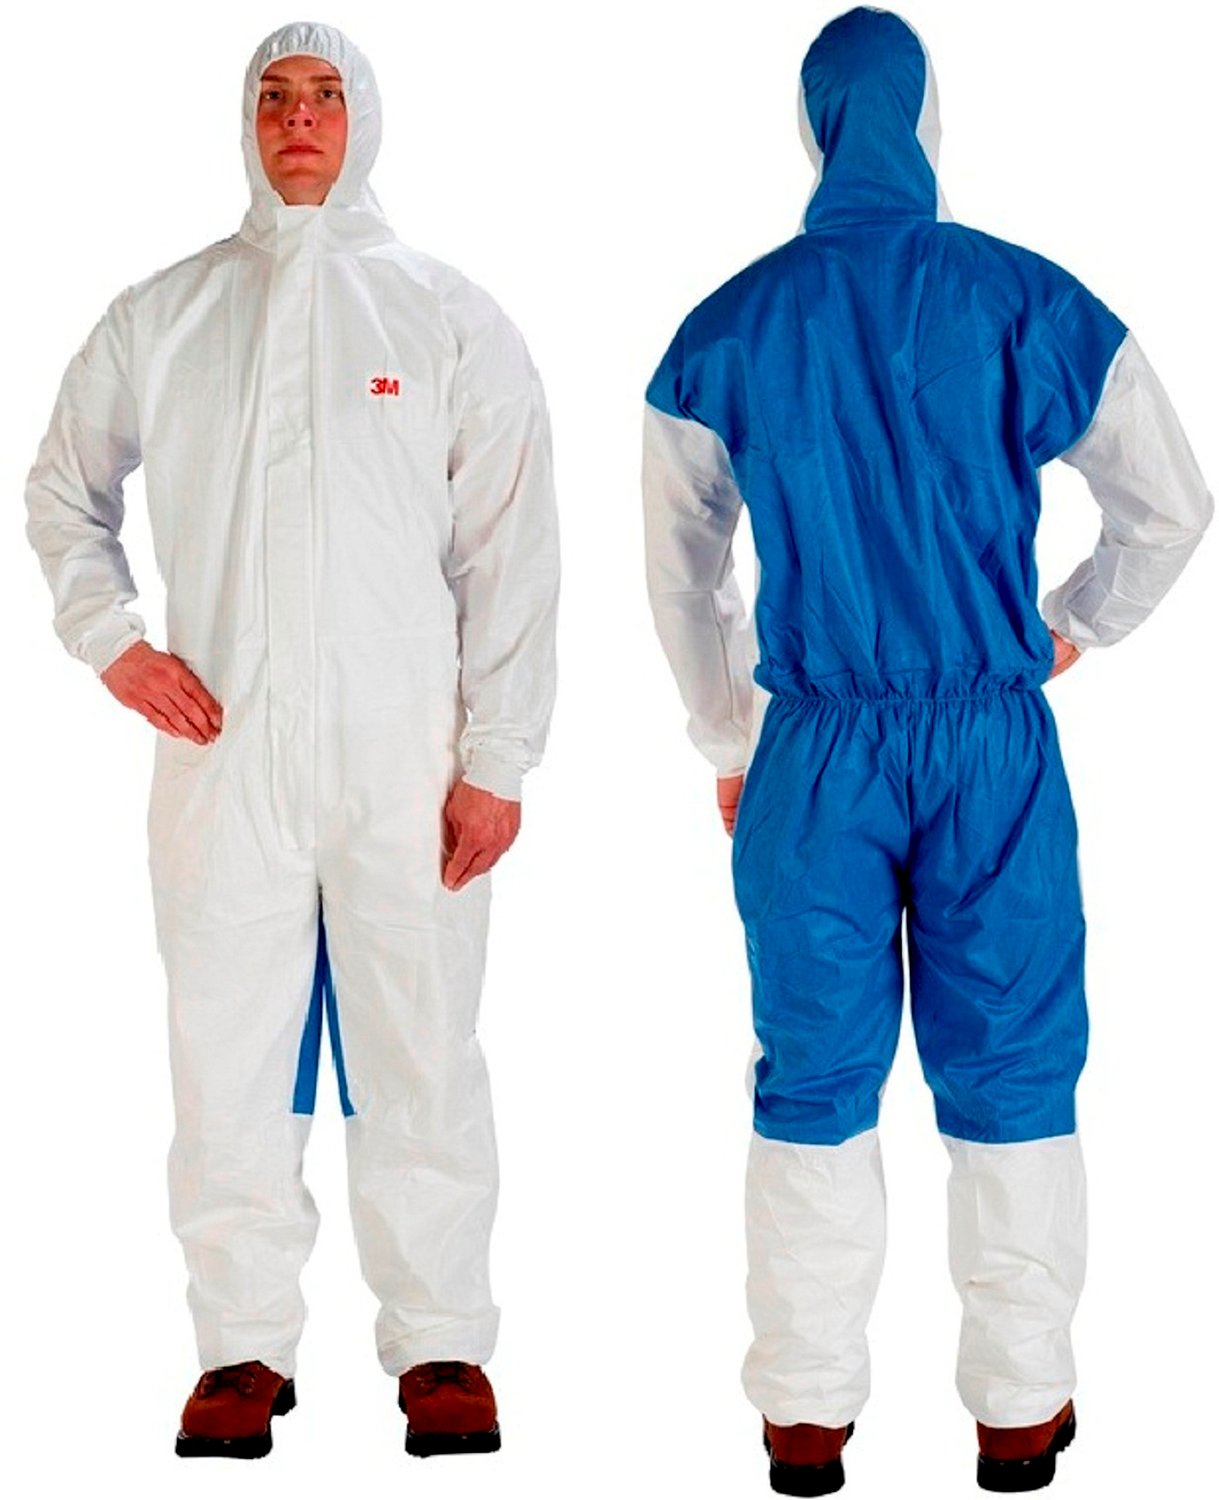 7100216889 - 3M Protective Coverall 4535, White & Blue Type 5/6, 2XL, 20 ea/Case